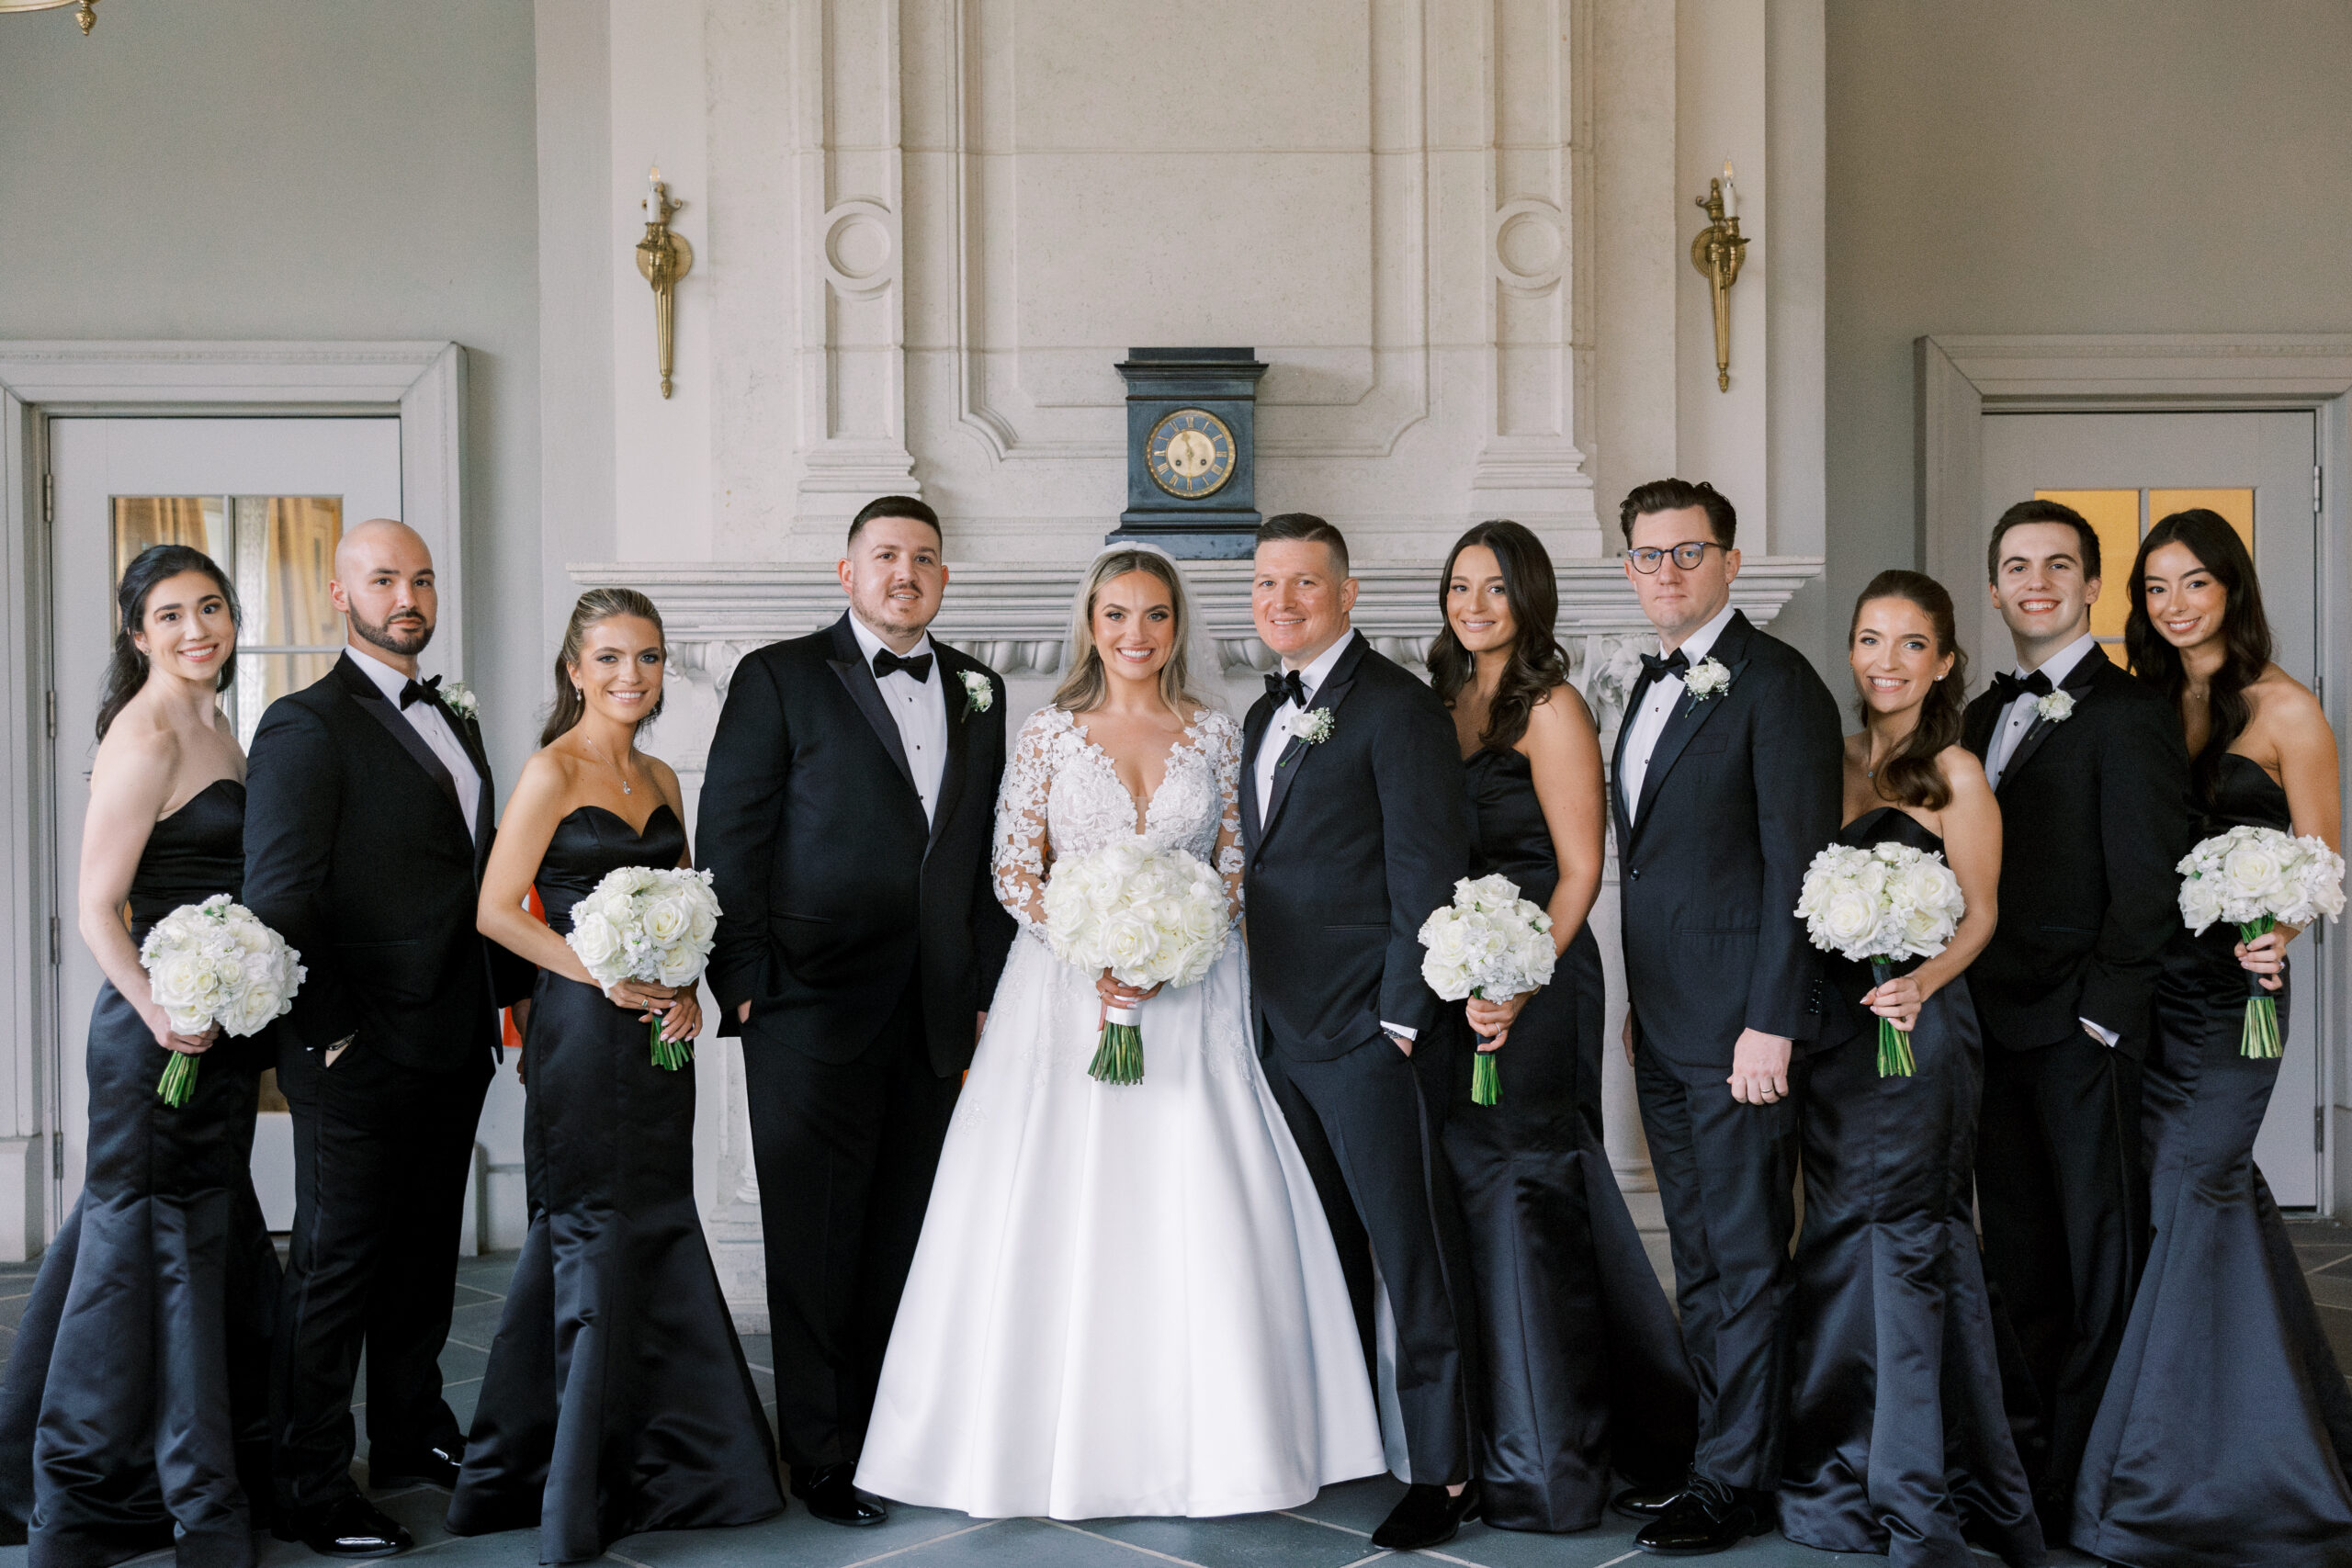 bride and groom stand with bridesmaids and groomsmen dressed in all black